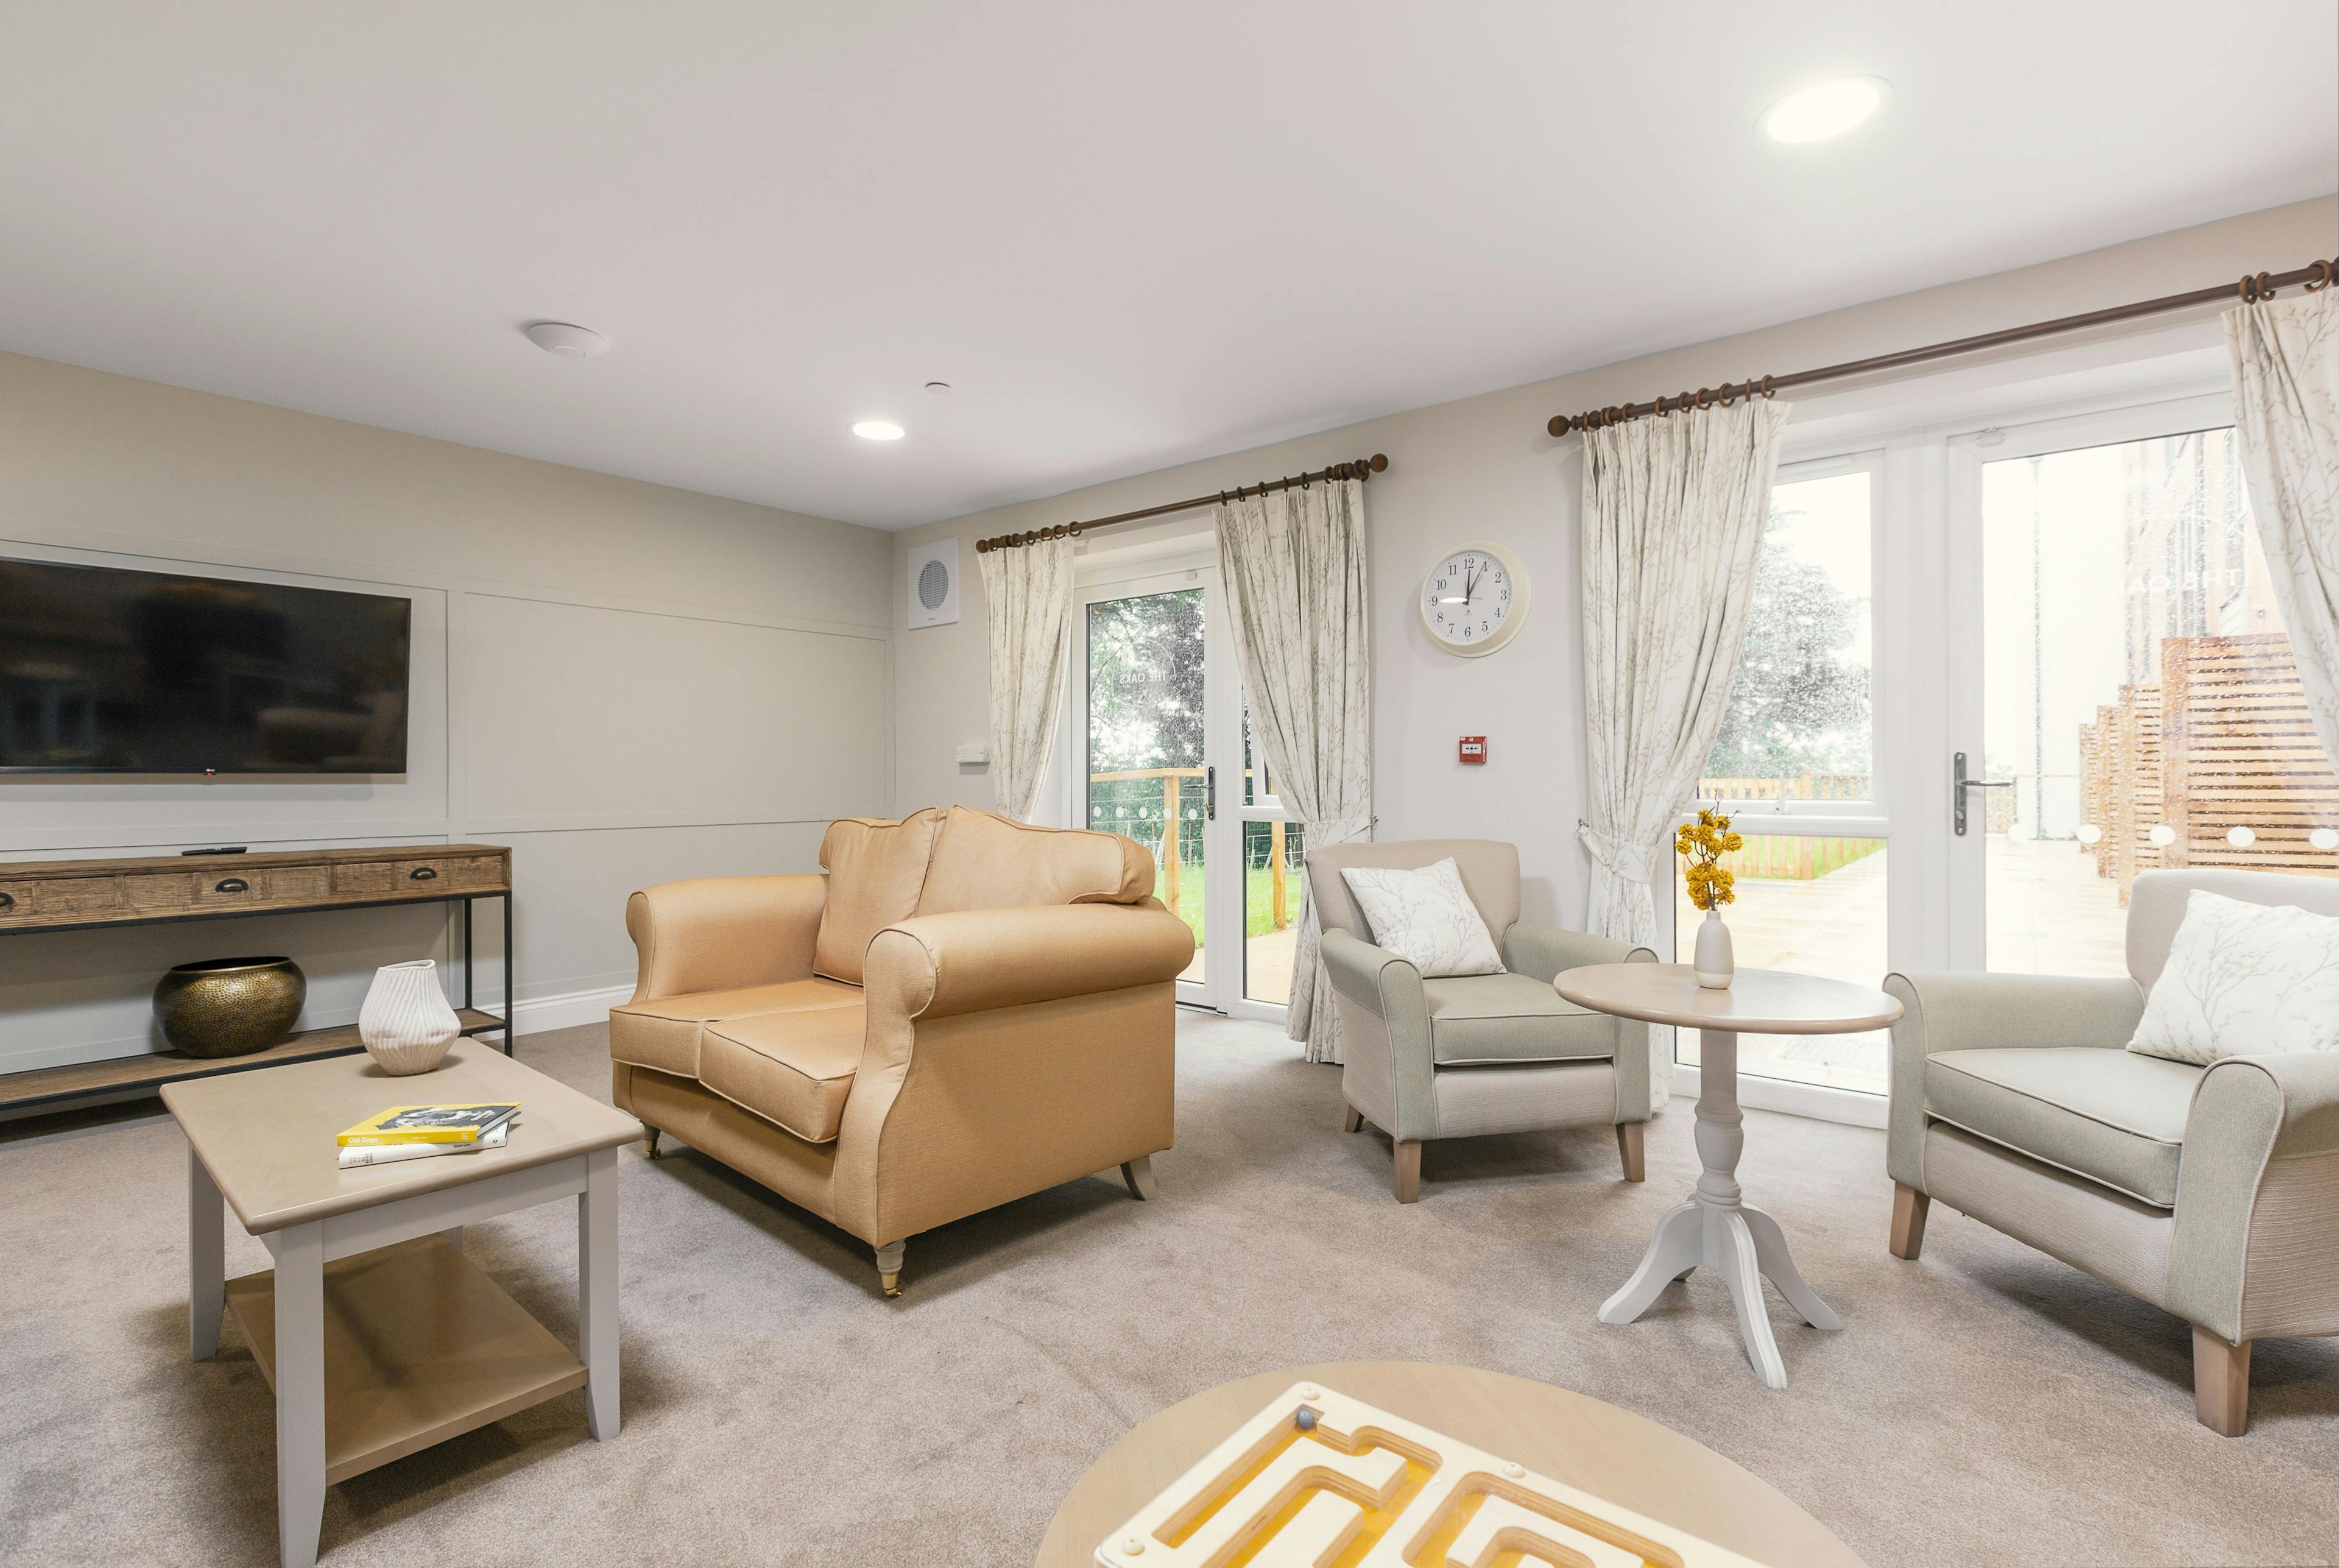 Lounge of The Oaks care home in Birmingham, West Midlands